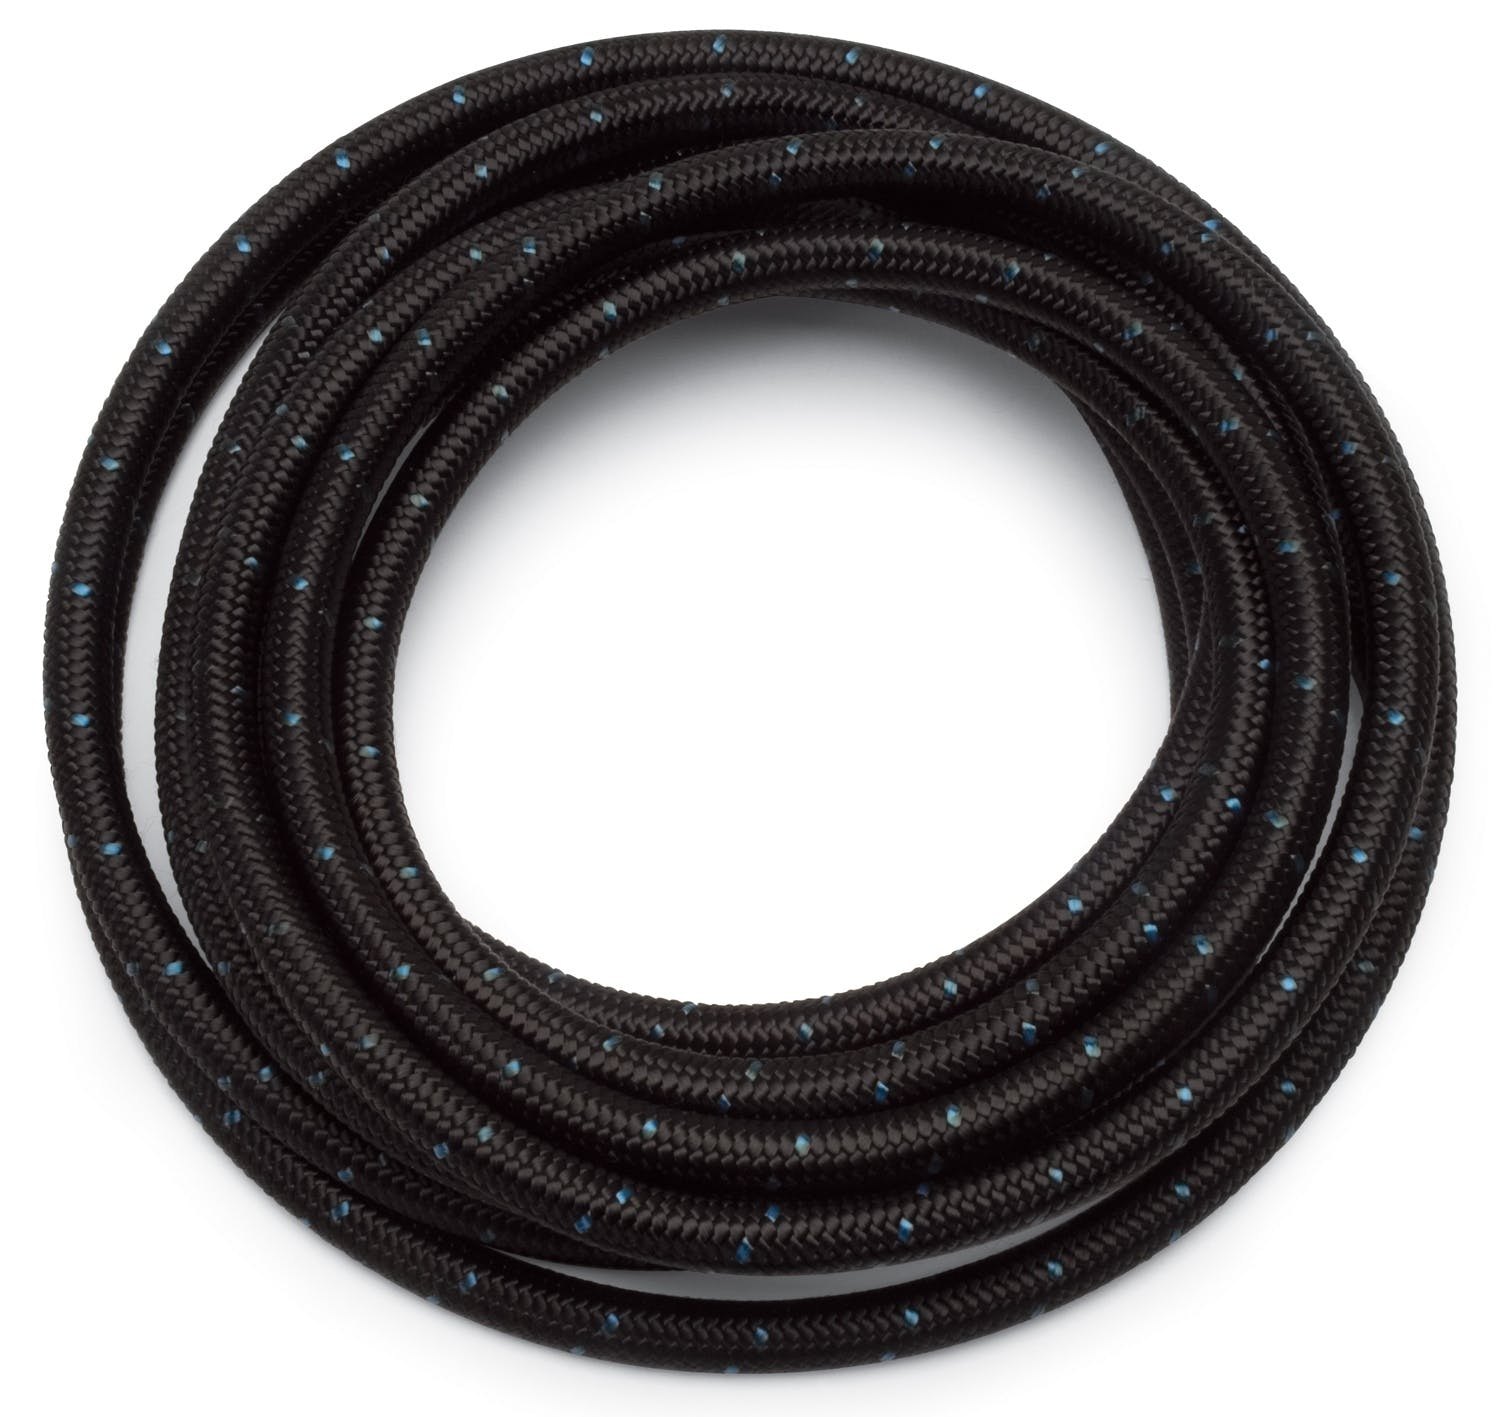 Russell 632053 #6 Black Cloth hose  Blue Tracer  3ft length